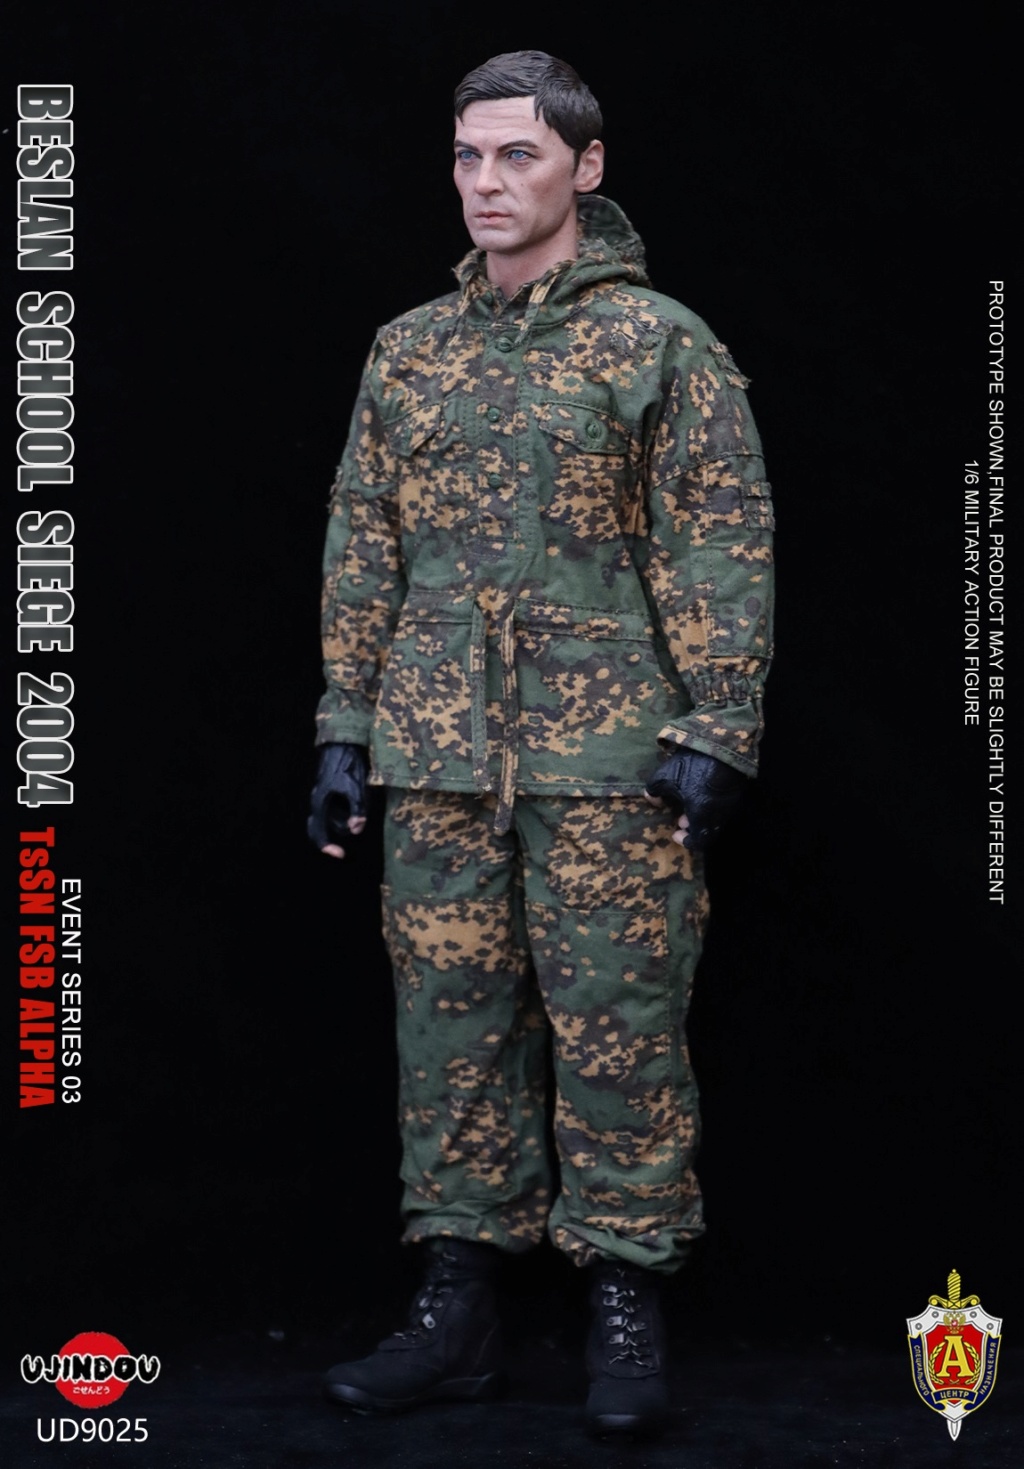 newproduct - NEW PRODUCT: UJINDOU: 1/6 FSB Special Forces of the Russian Federal Security Service - Beslan Incident 2004 #UD9025 11141510